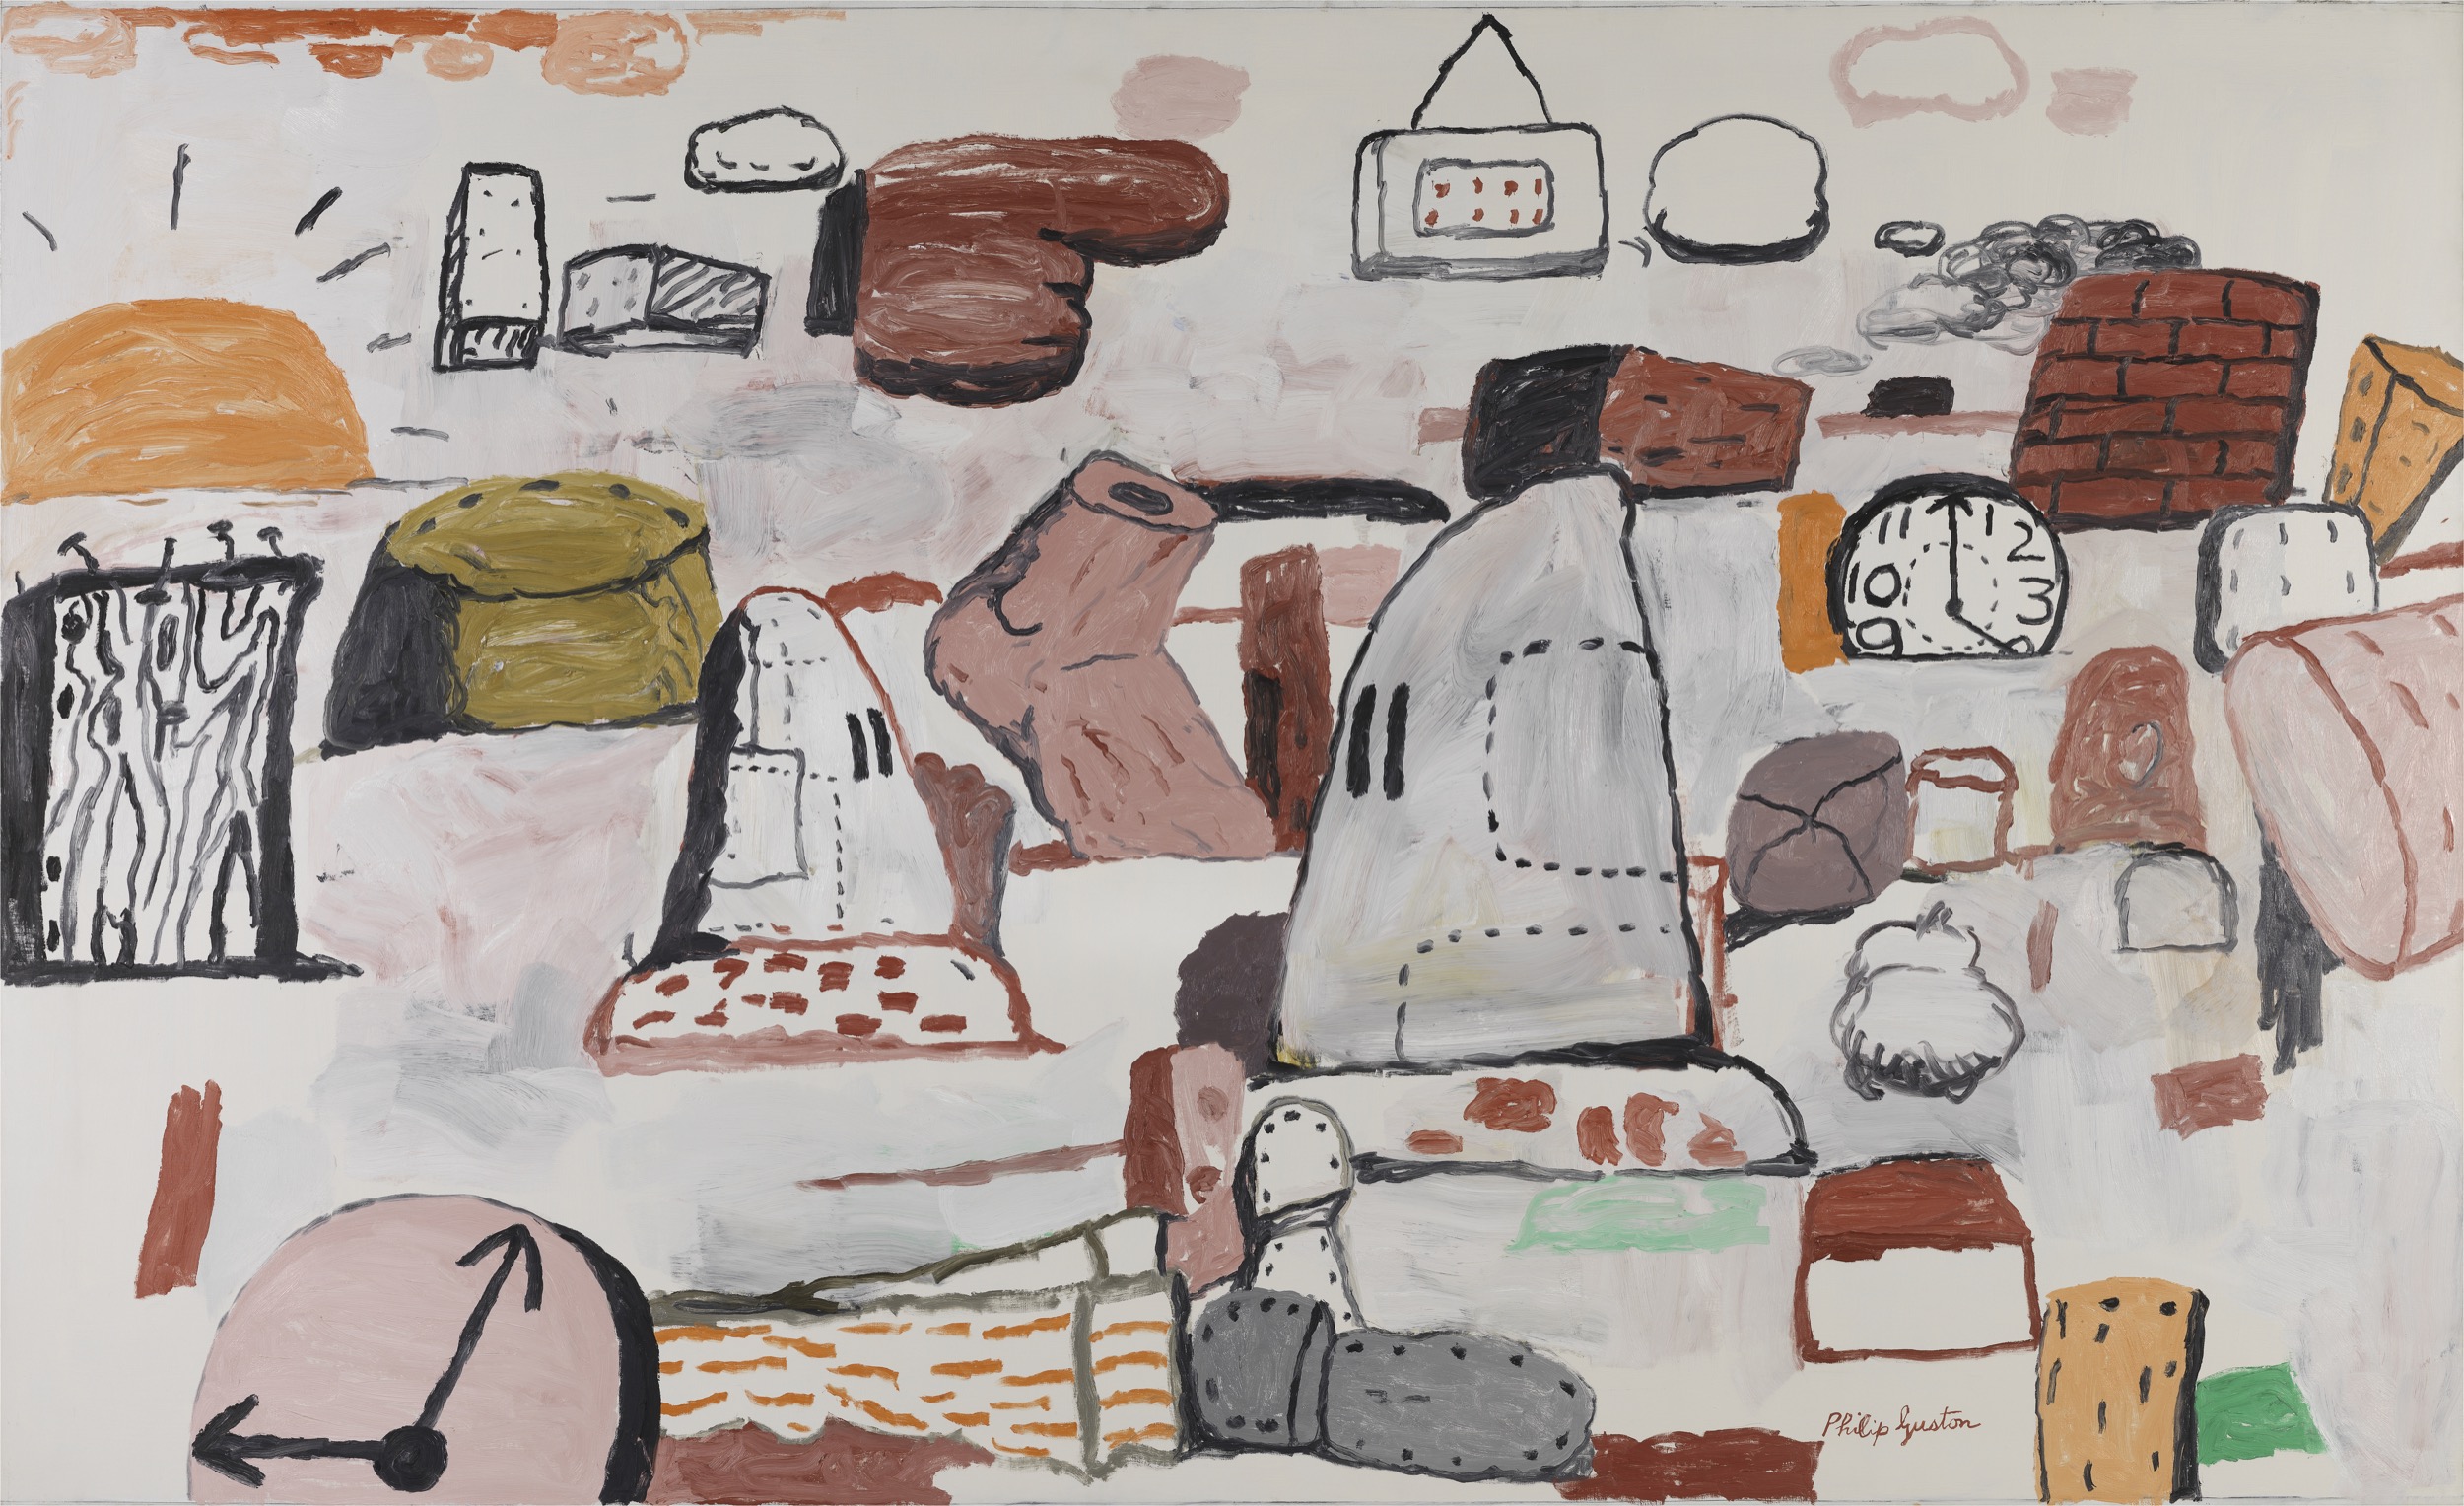 Philip Guston, Flatlands, 1970, oil on canvas; 177.8 × 290.83 cm, San Francisco Museum of Modern Art, Gift of Byron R. Meyer. © The Estate of Philip Guston